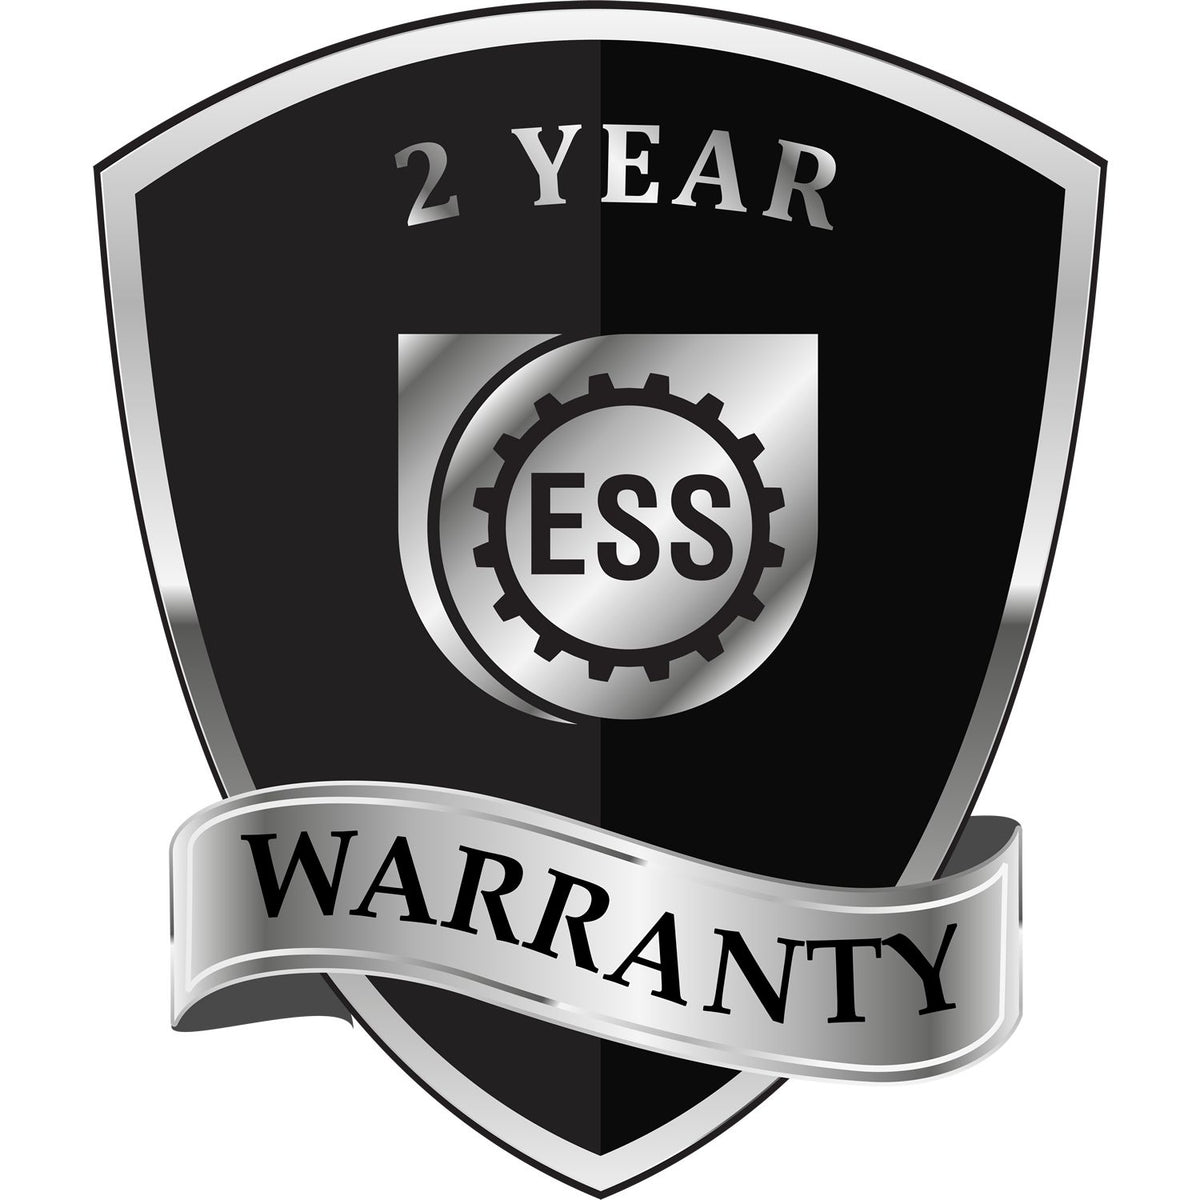 A black and silver badge or emblem showing warranty information for the Gift Kentucky Landscape Architect Seal